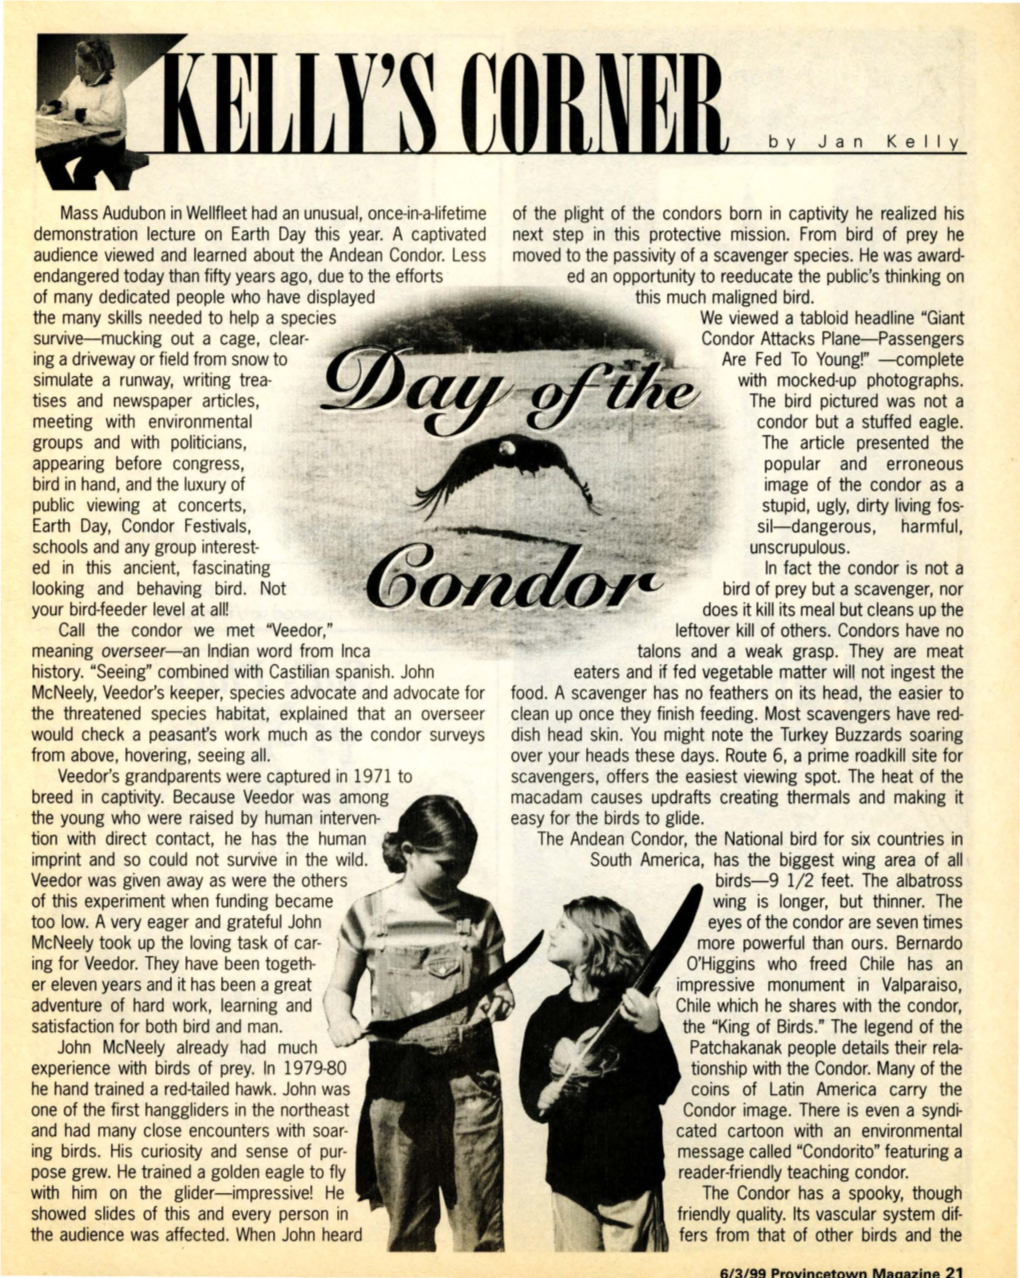 Day of the Condor